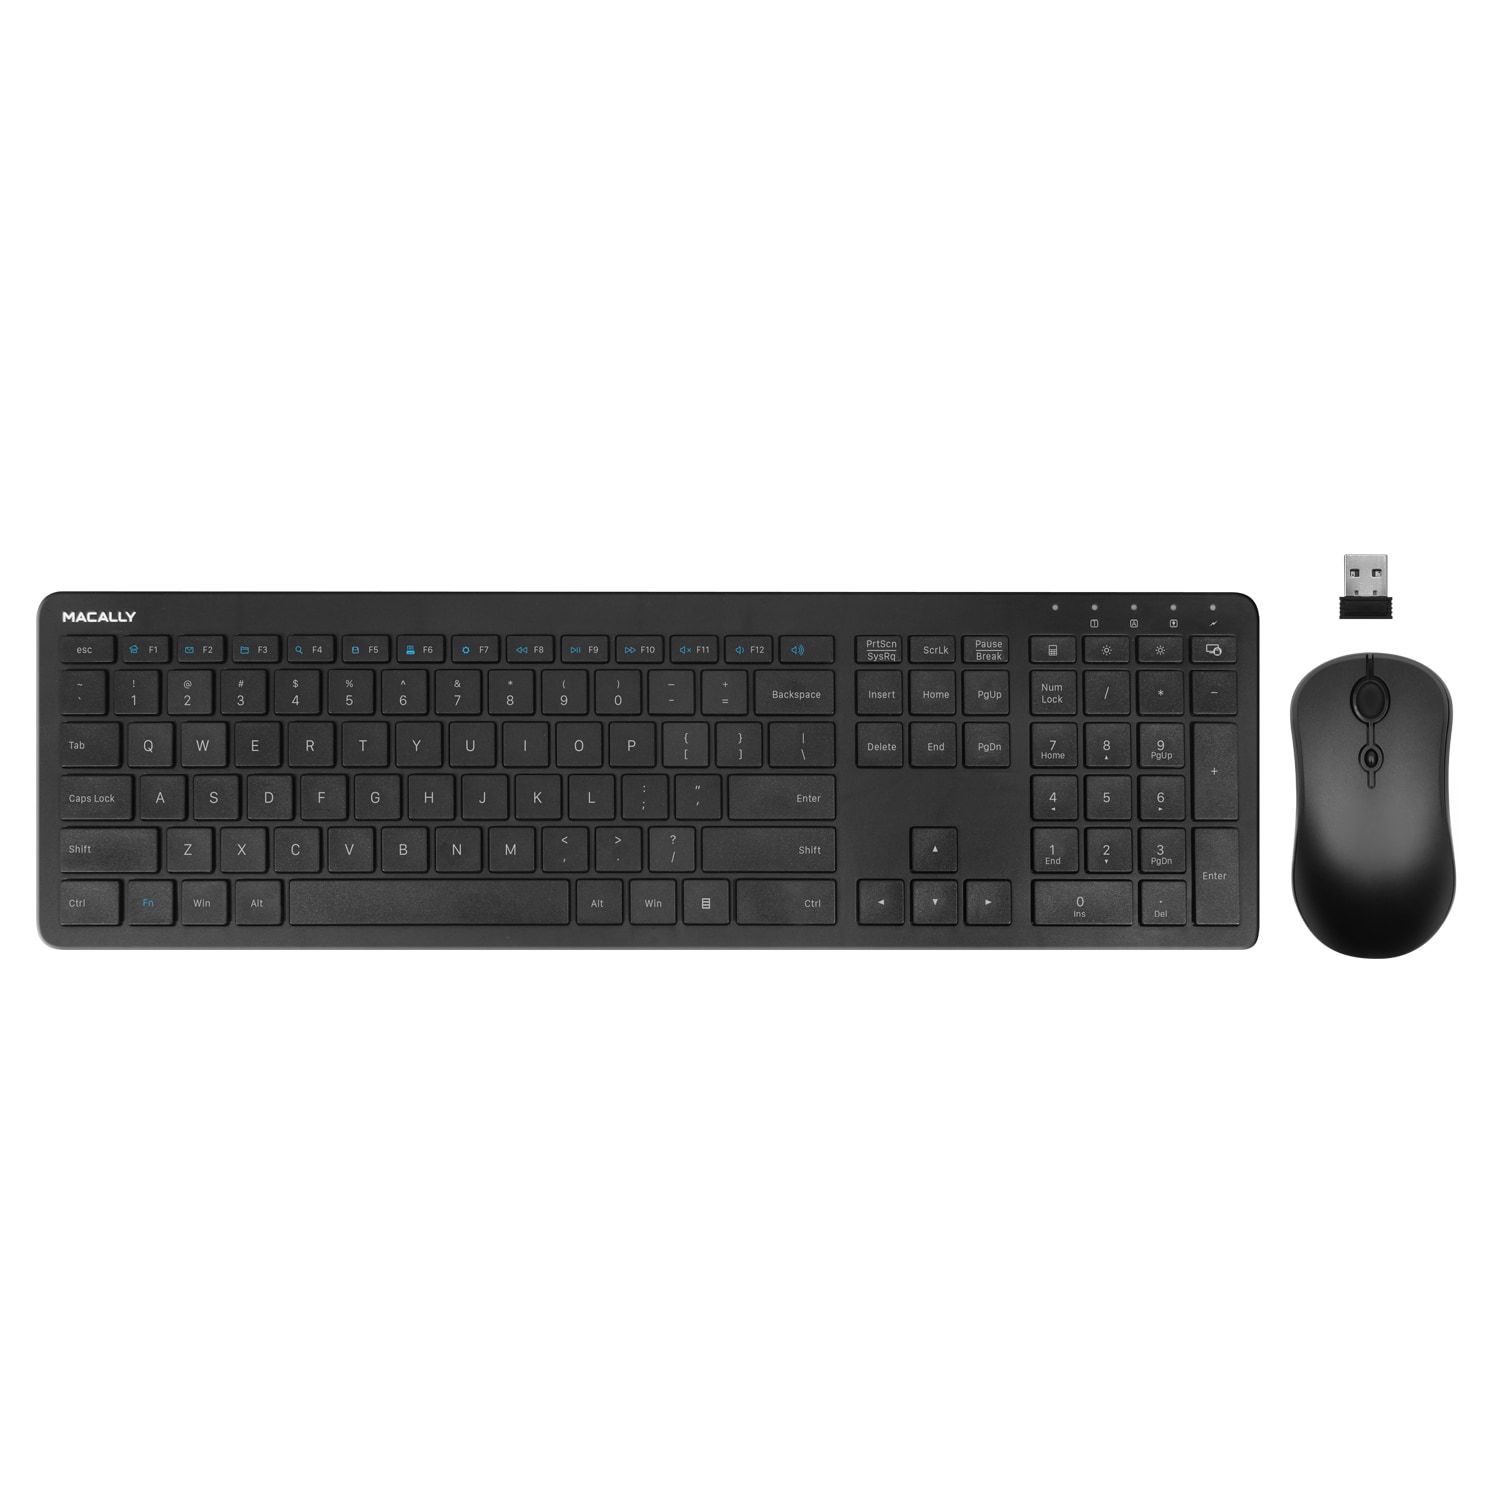 2.4GHz Wireless Keyboard And Mouse Combo Set 2.4G For PC Windows Slim USA 